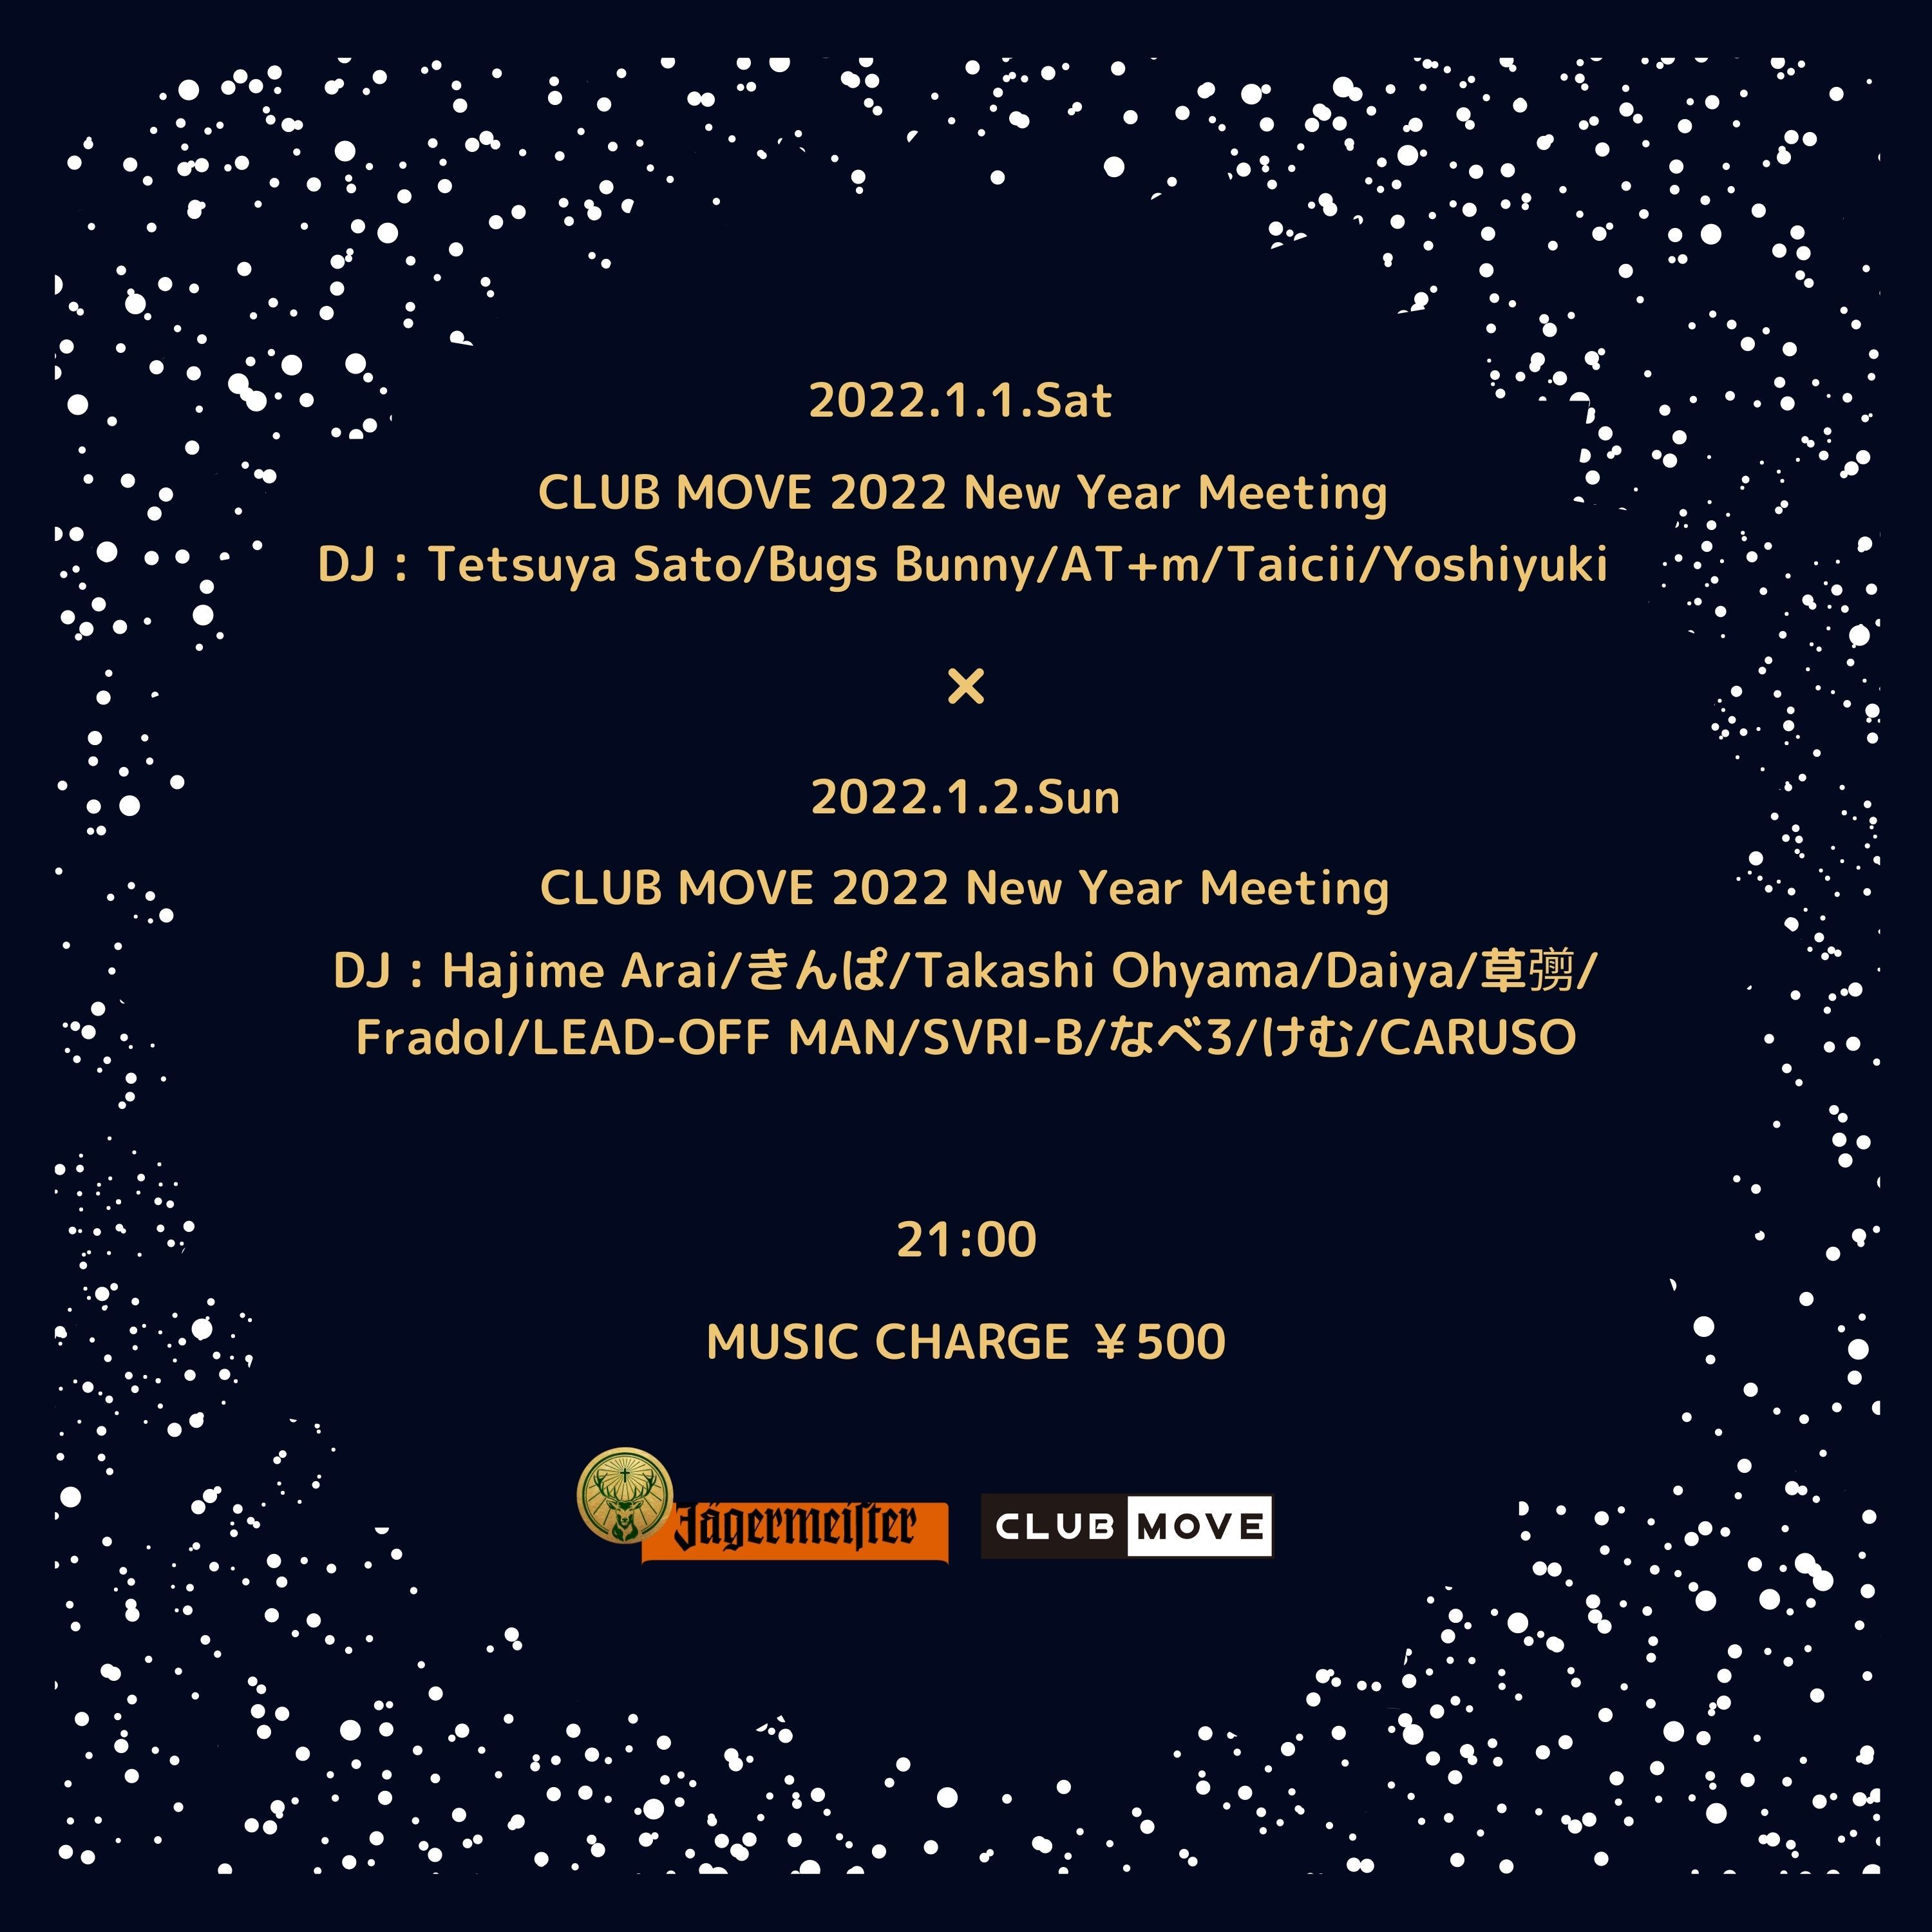 CLUB MOVE 2022 -New Year Meeting-